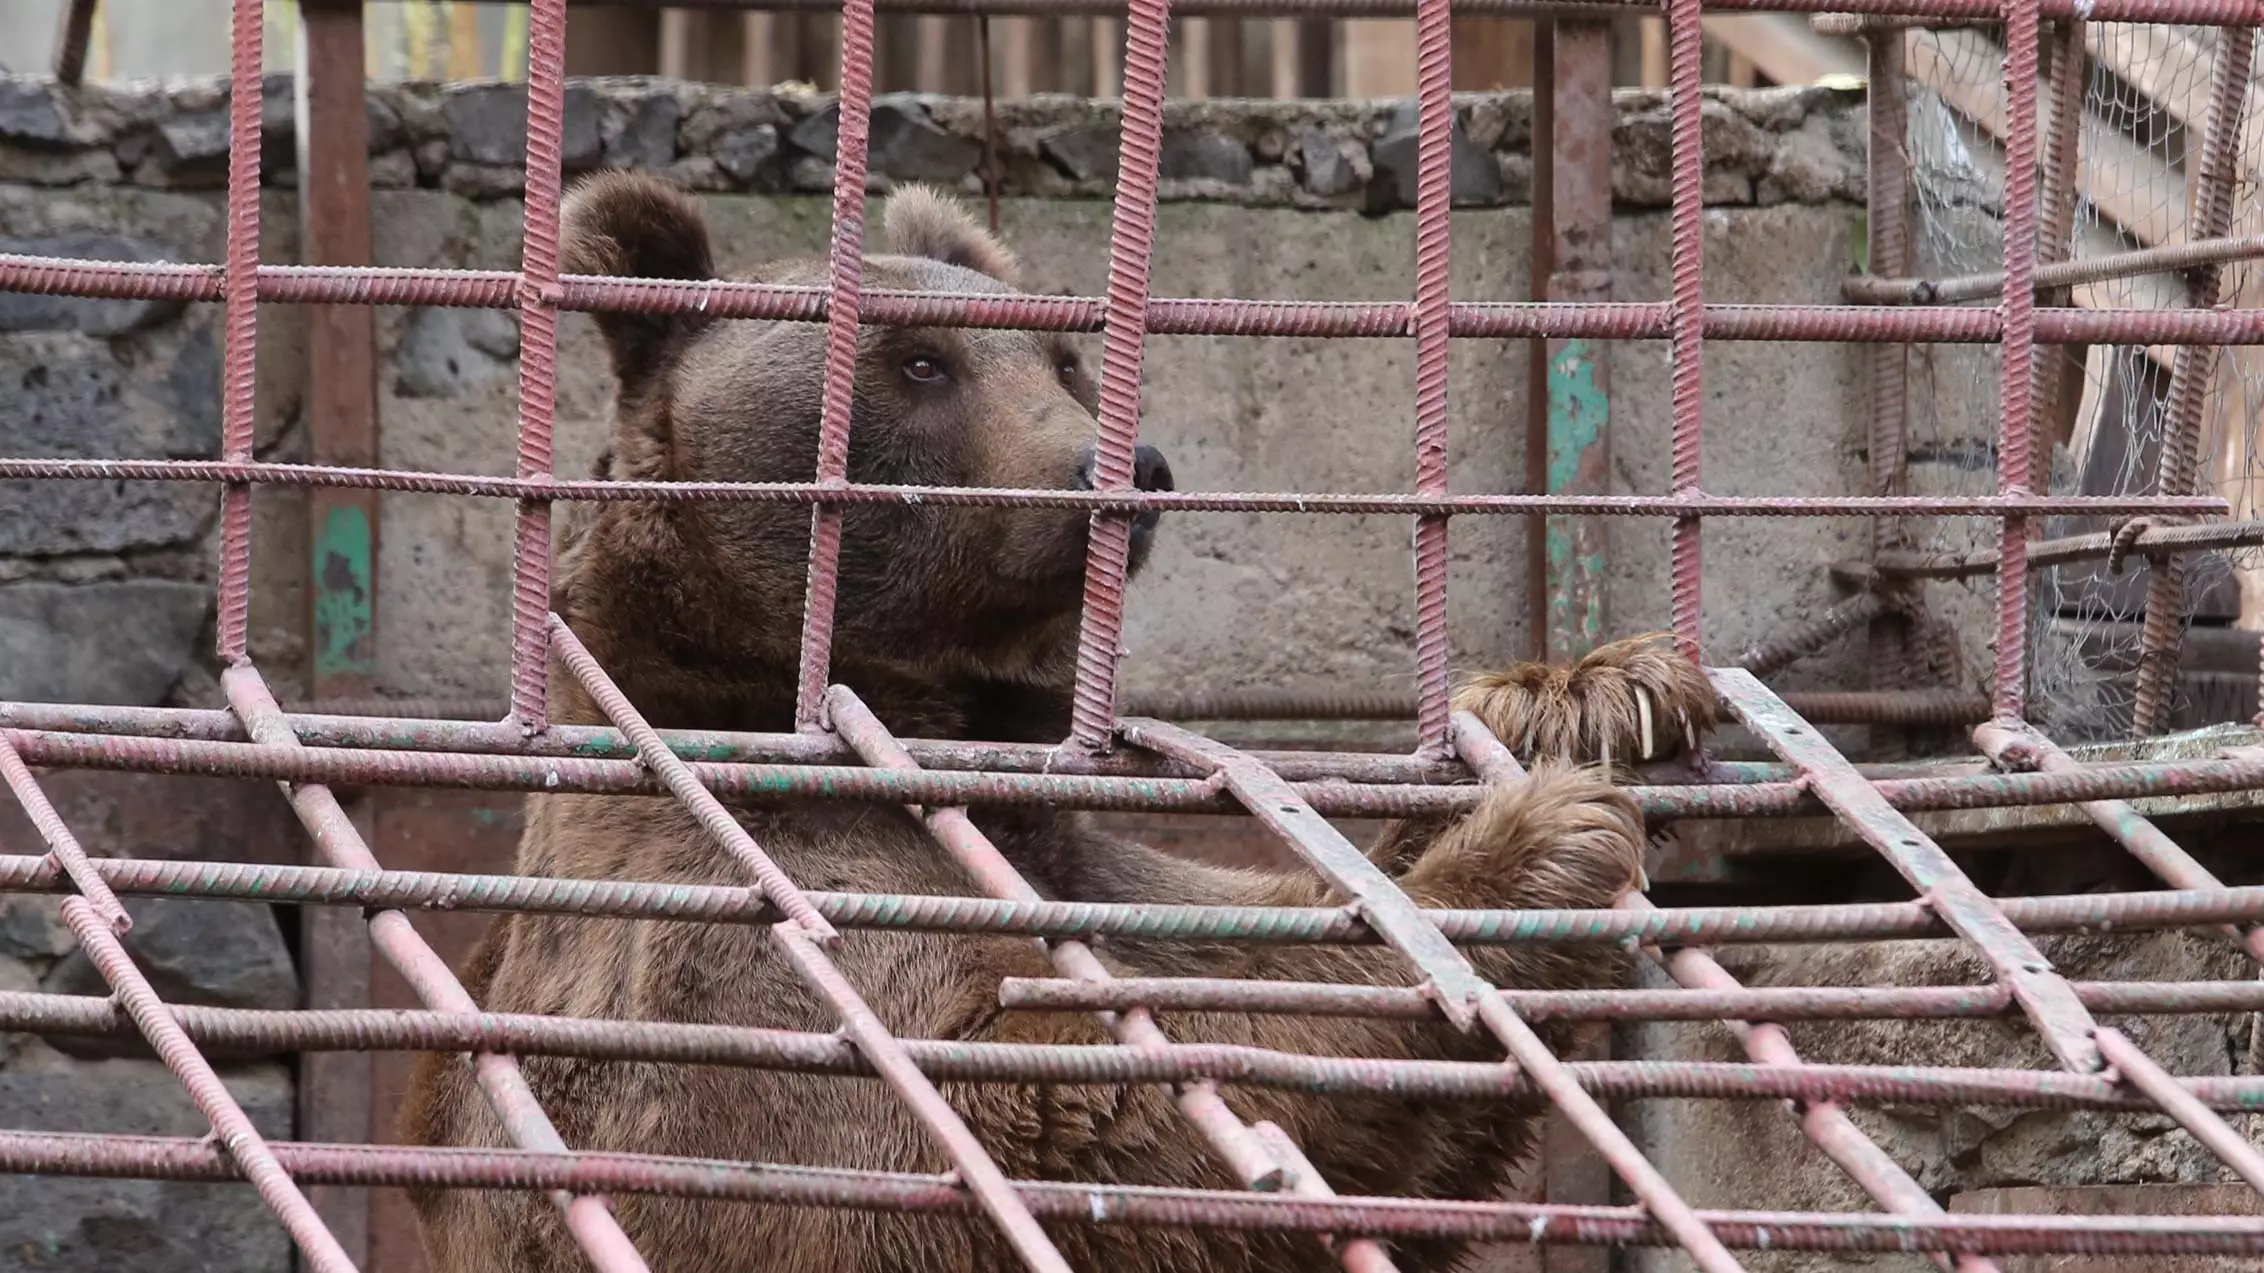 Bears Kept In Cages Next To Armenian Restaurant Have Been Freed After Online Appeal